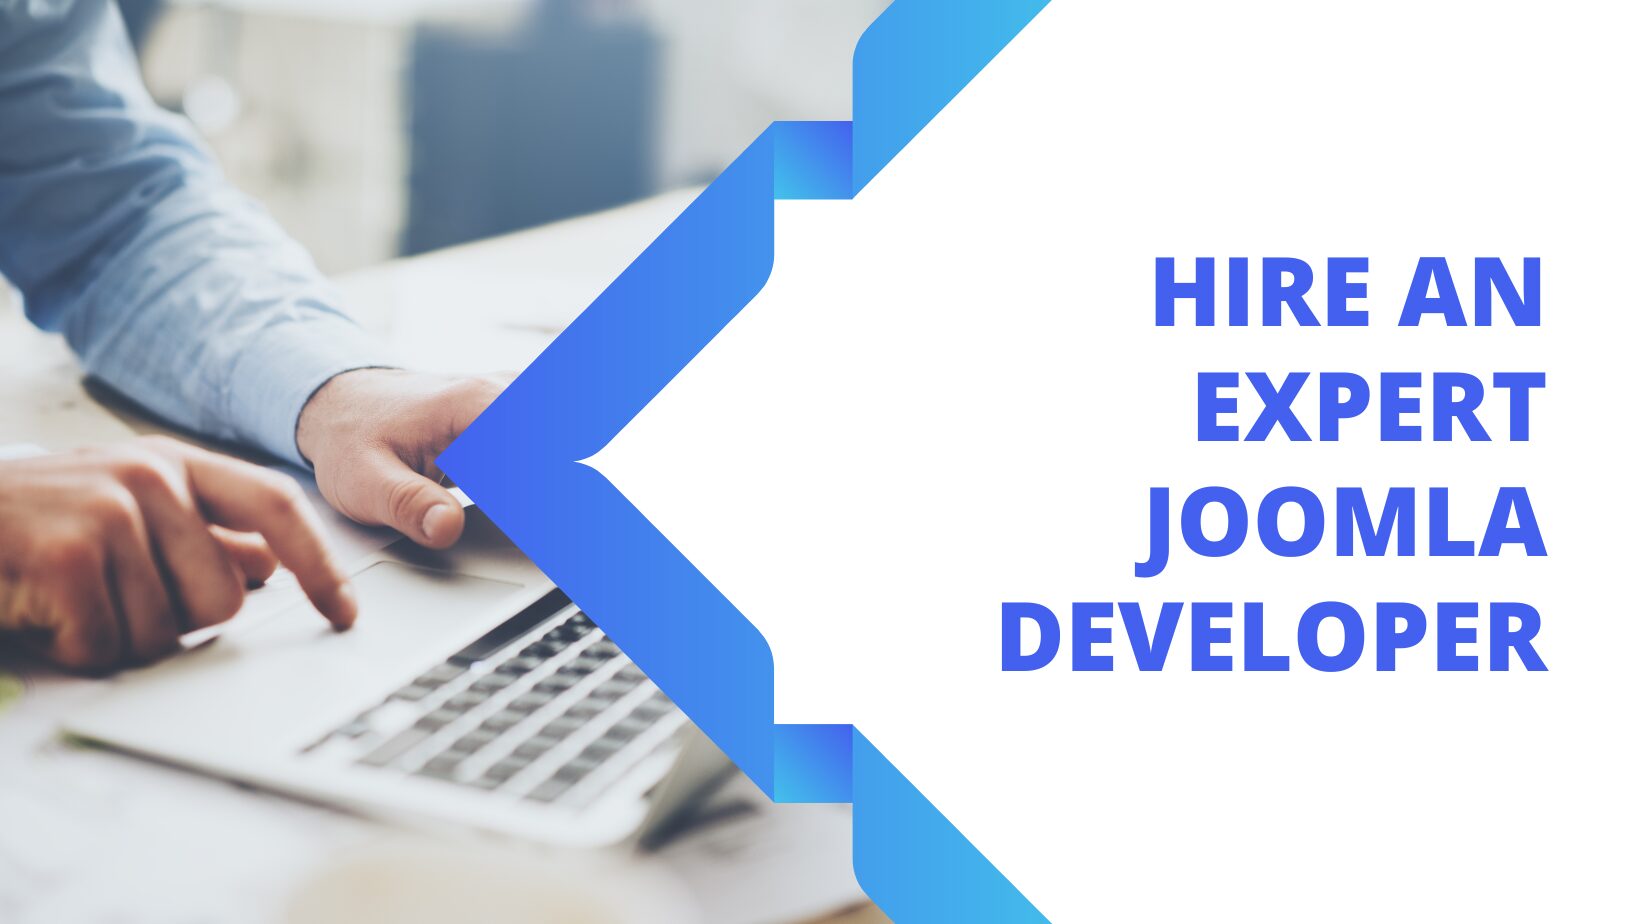 Why You Should Hire an Expert Joomla Developer